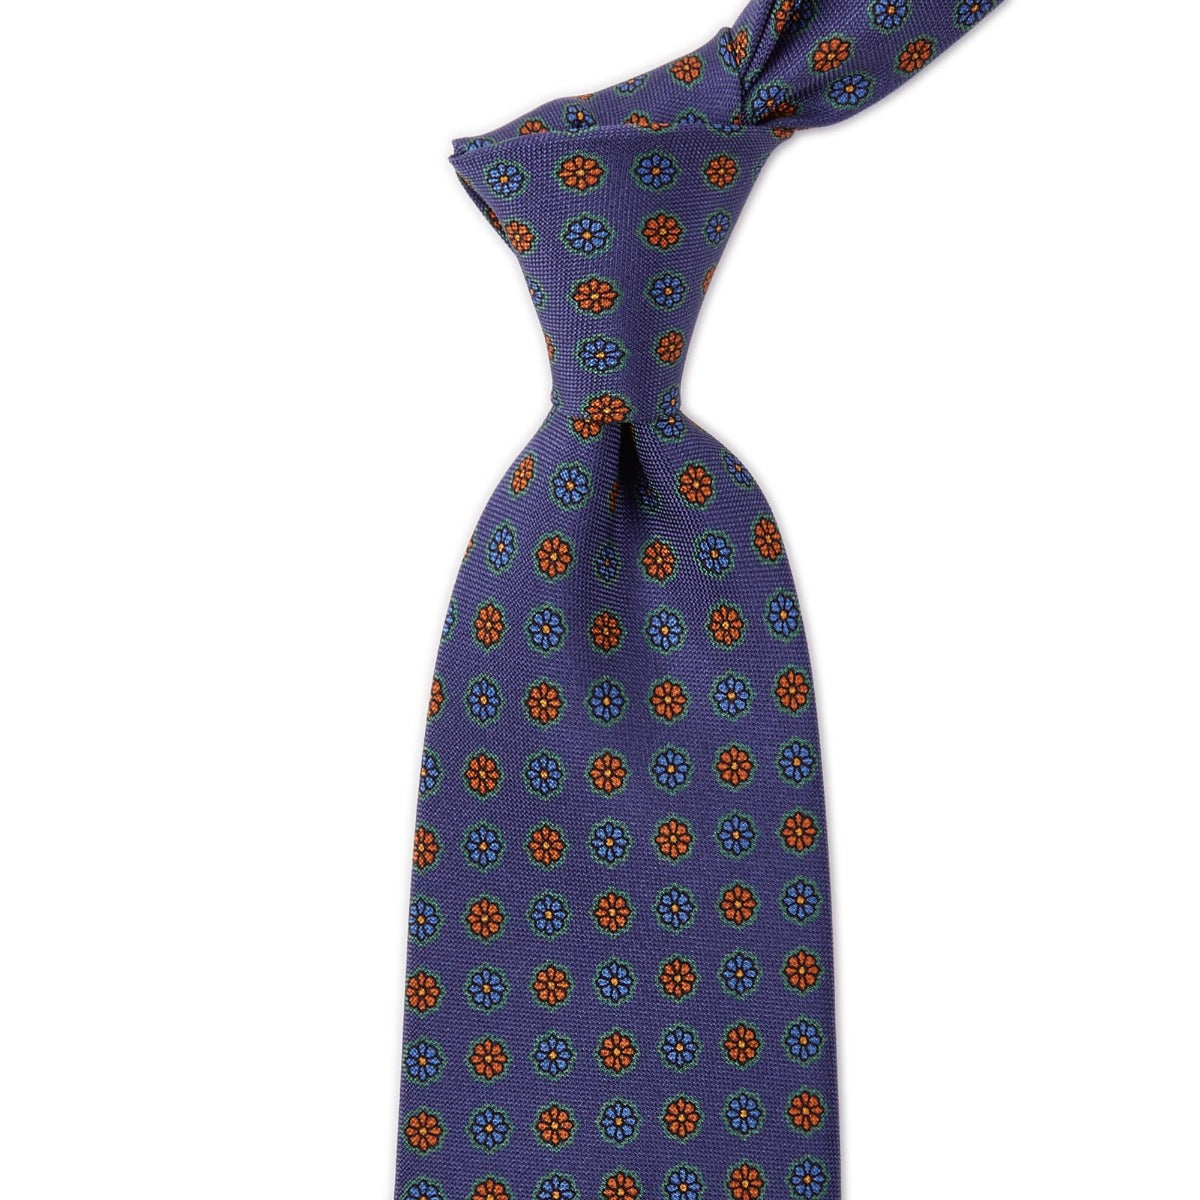 A high-quality Sovereign Grade Blue Medallion Jacquard Silk Tie with an orange and blue pattern, made in the United Kingdom, from KirbyAllison.com.